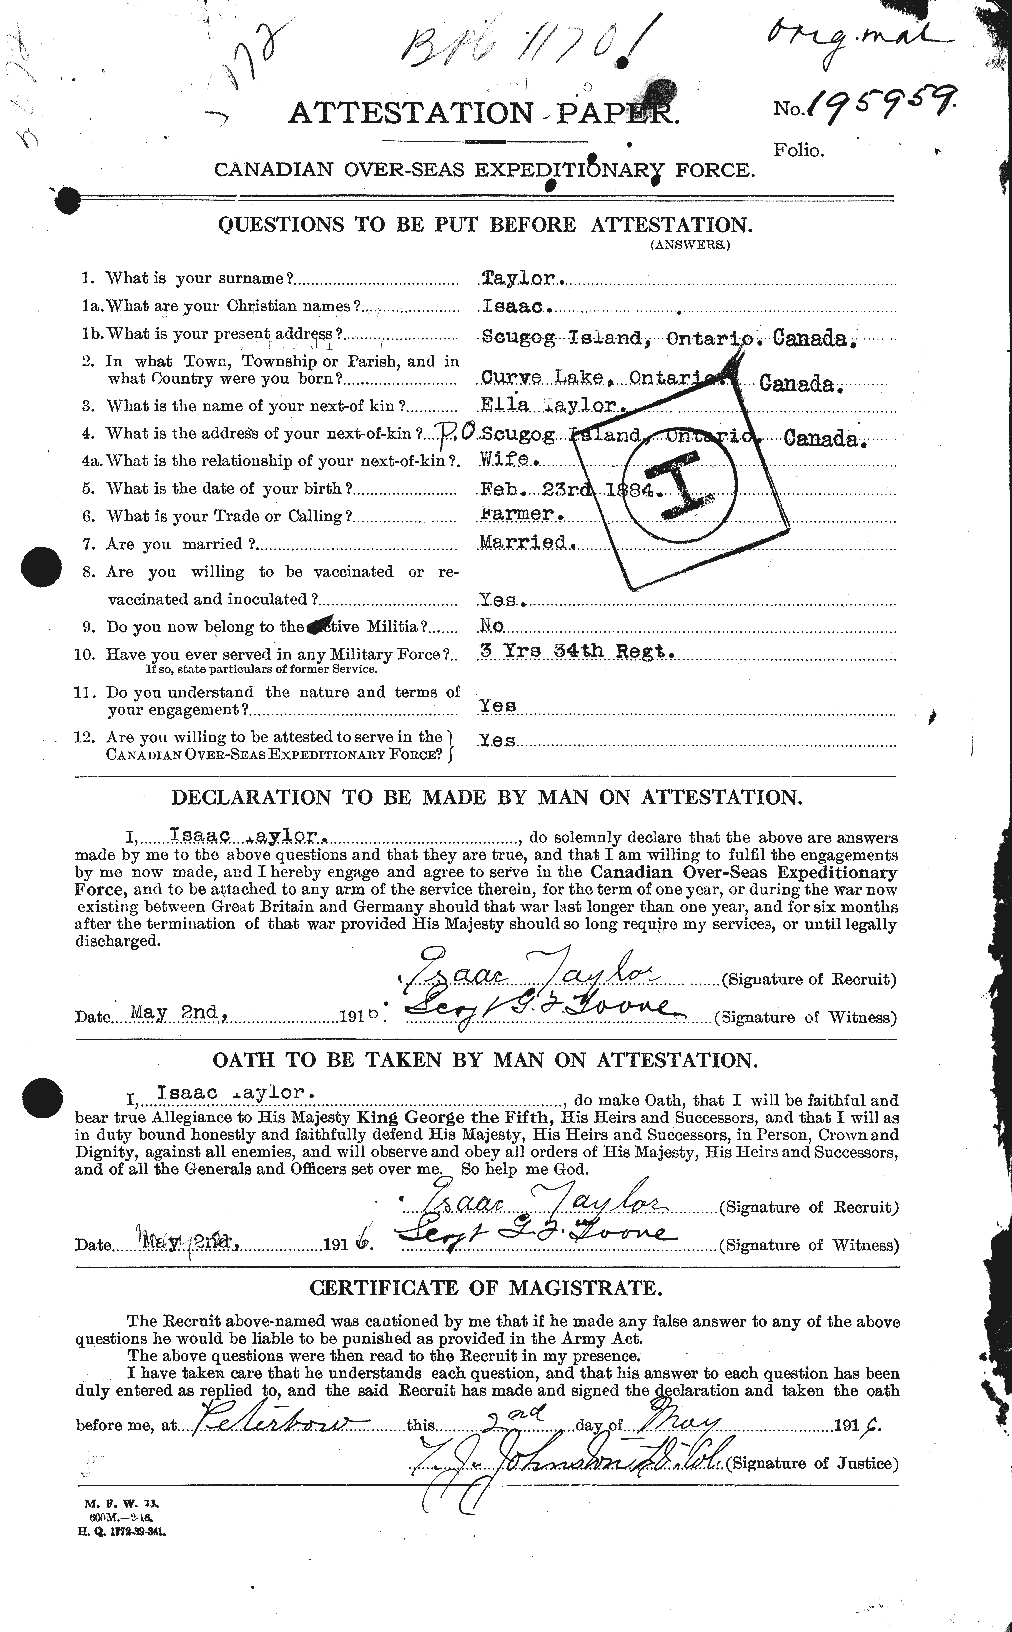 Personnel Records of the First World War - CEF 626630a